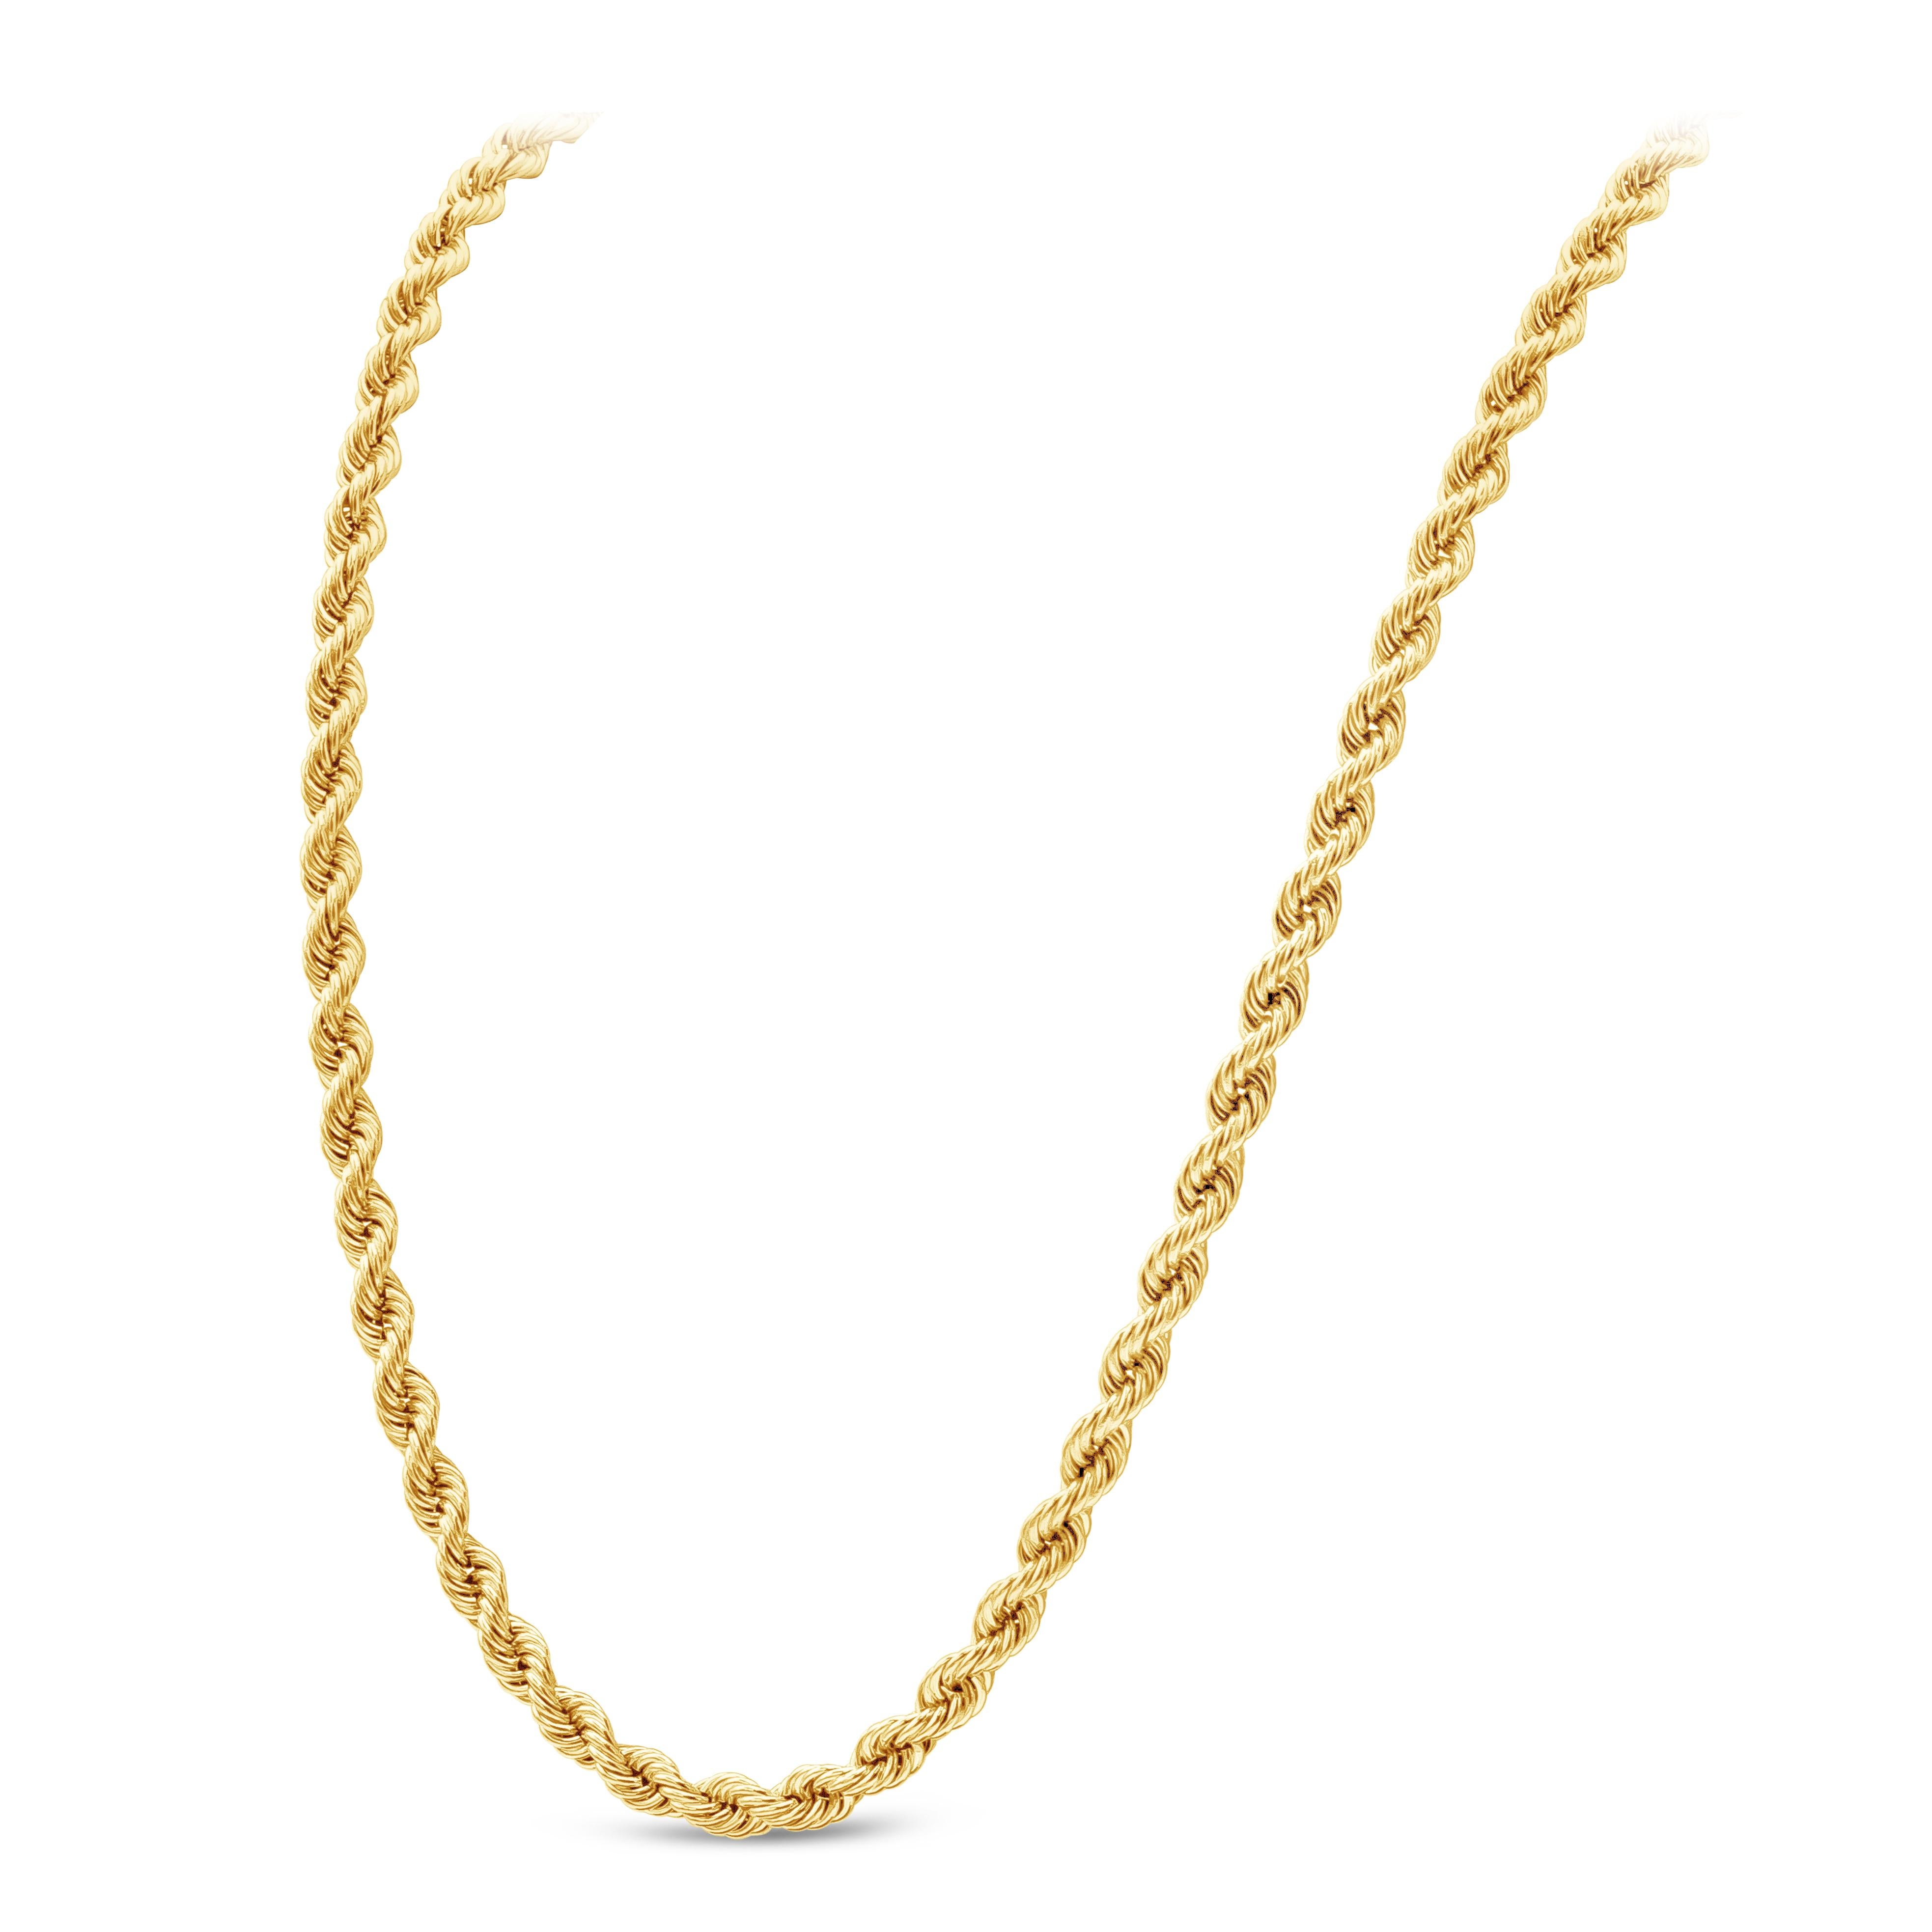 A classic plain rope chain made with 14K Yellow Gold. 47 grams in weight and 30 inches in length. 

Style available in different price ranges. Prices are based on your selection. Please contact us for more information.